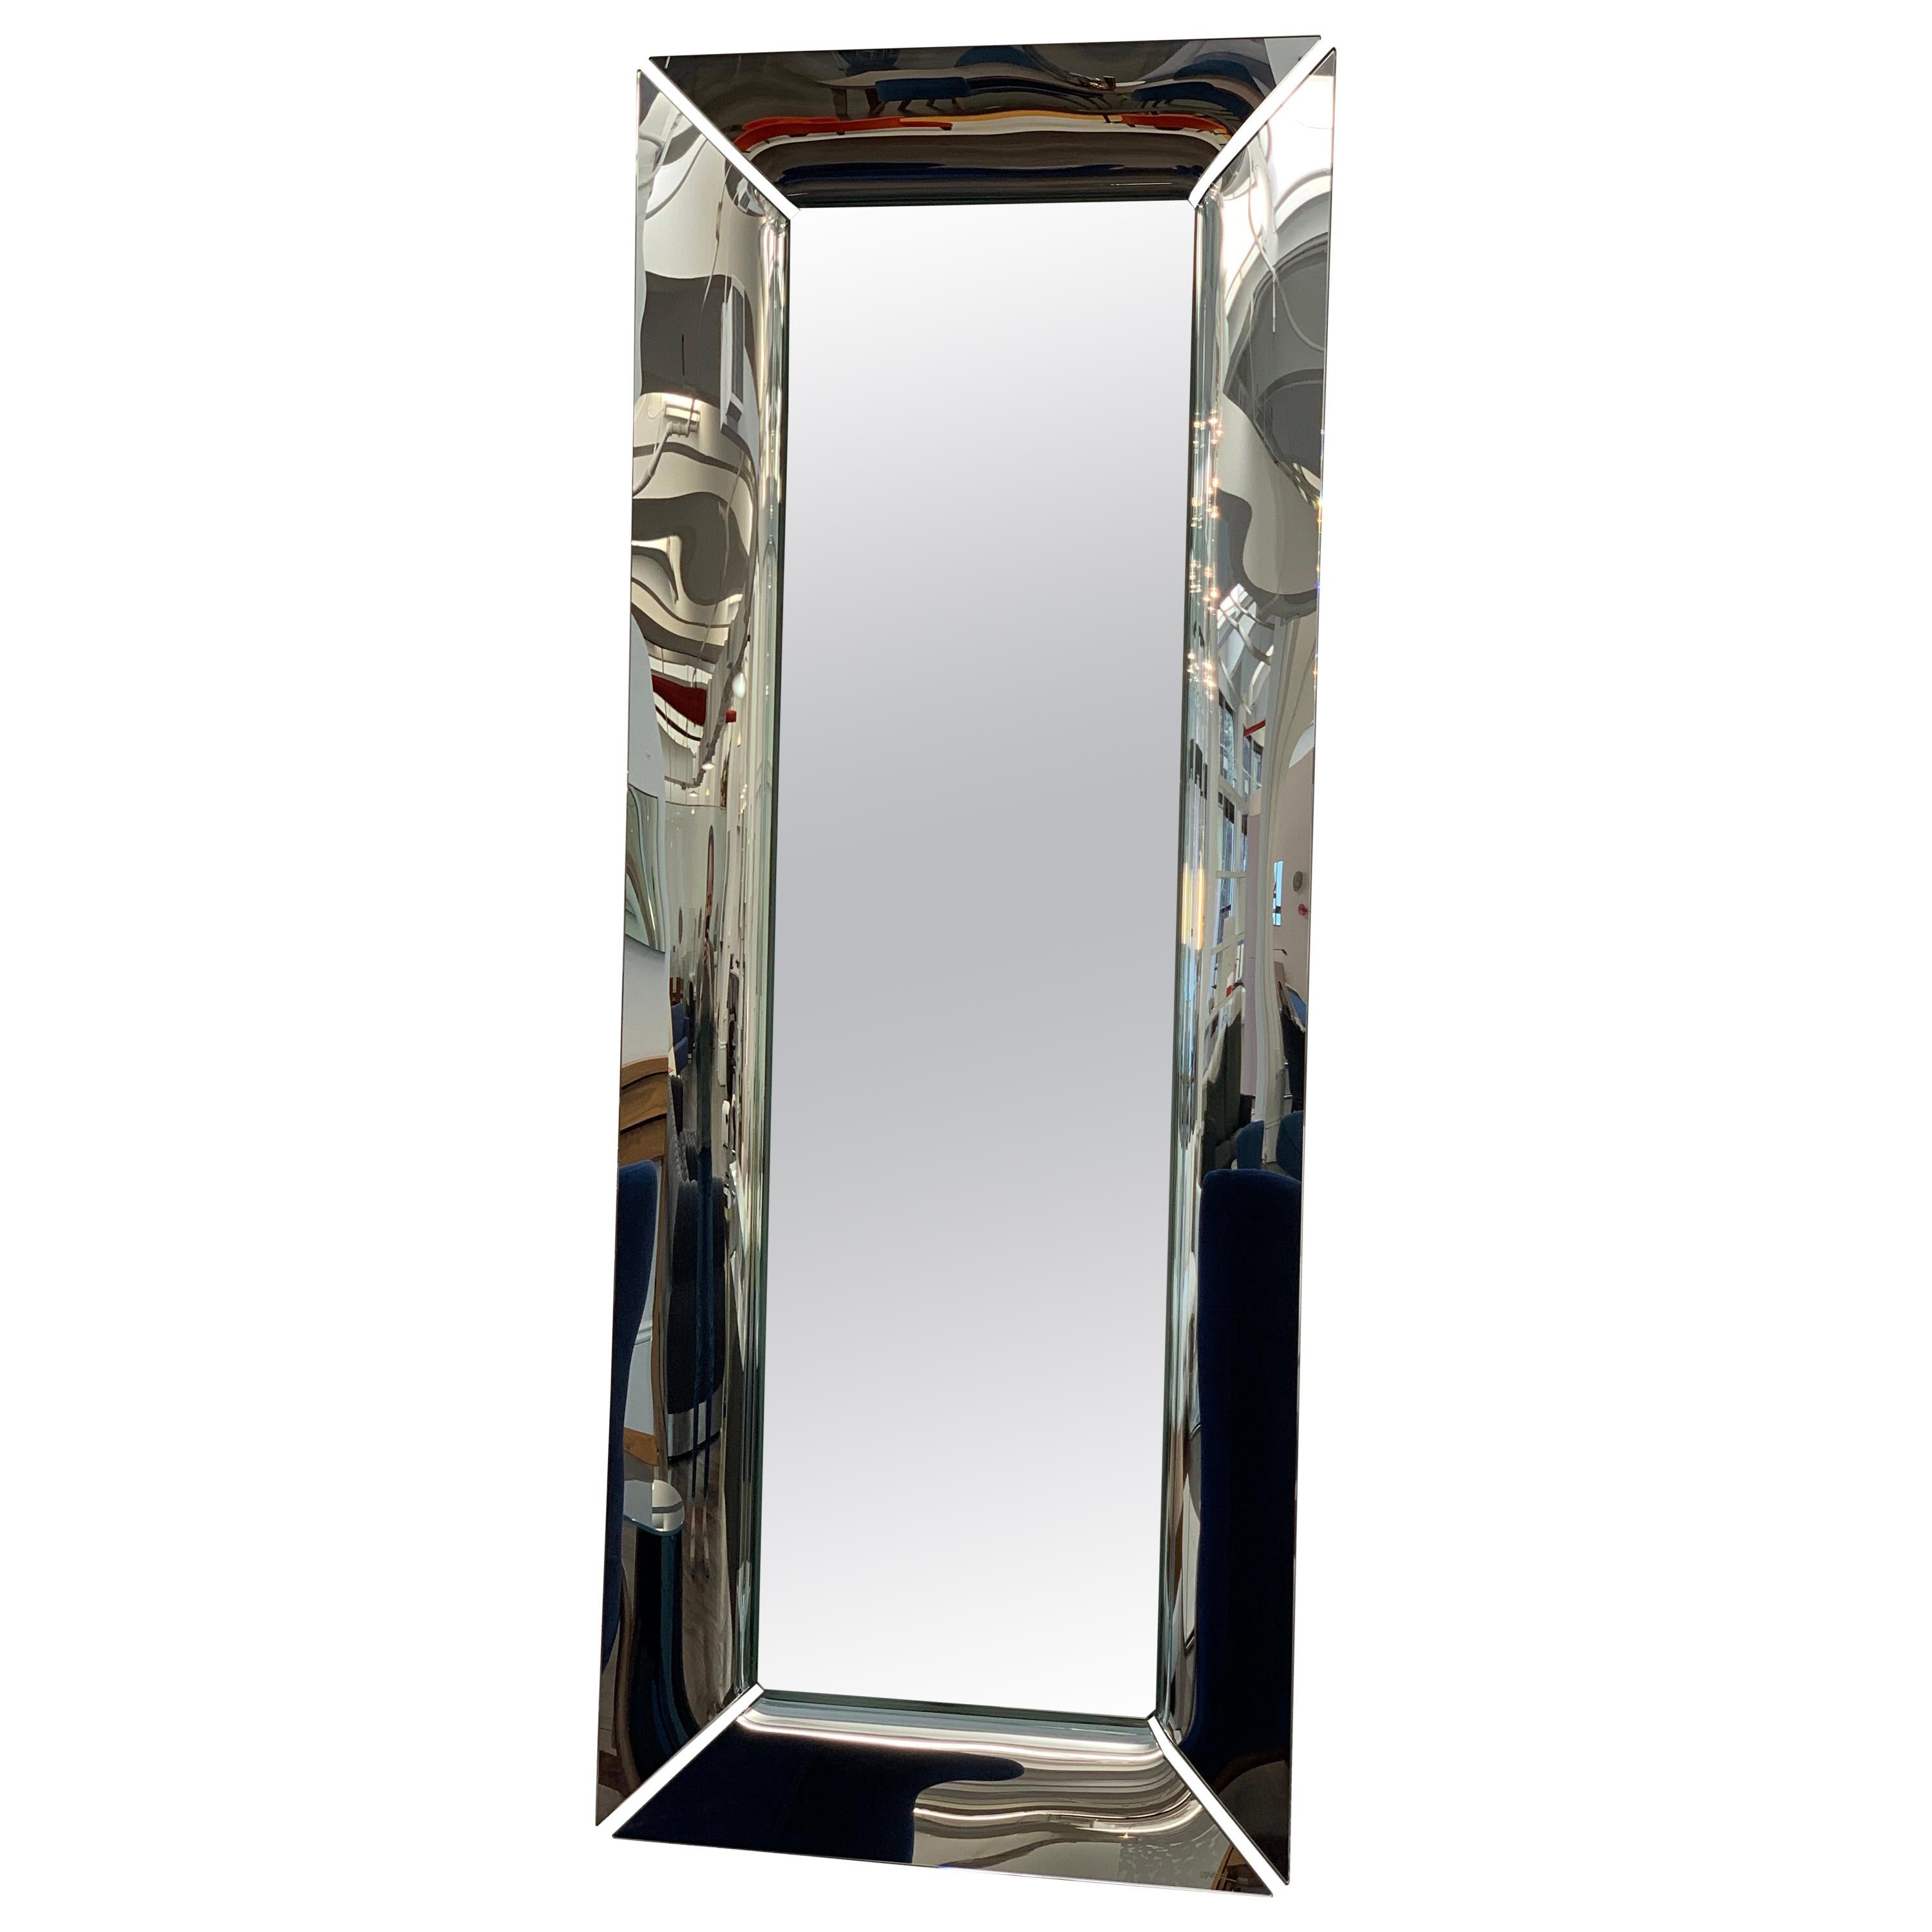 Fiam Caadre Wall Mirror Designed by Philippe Starck